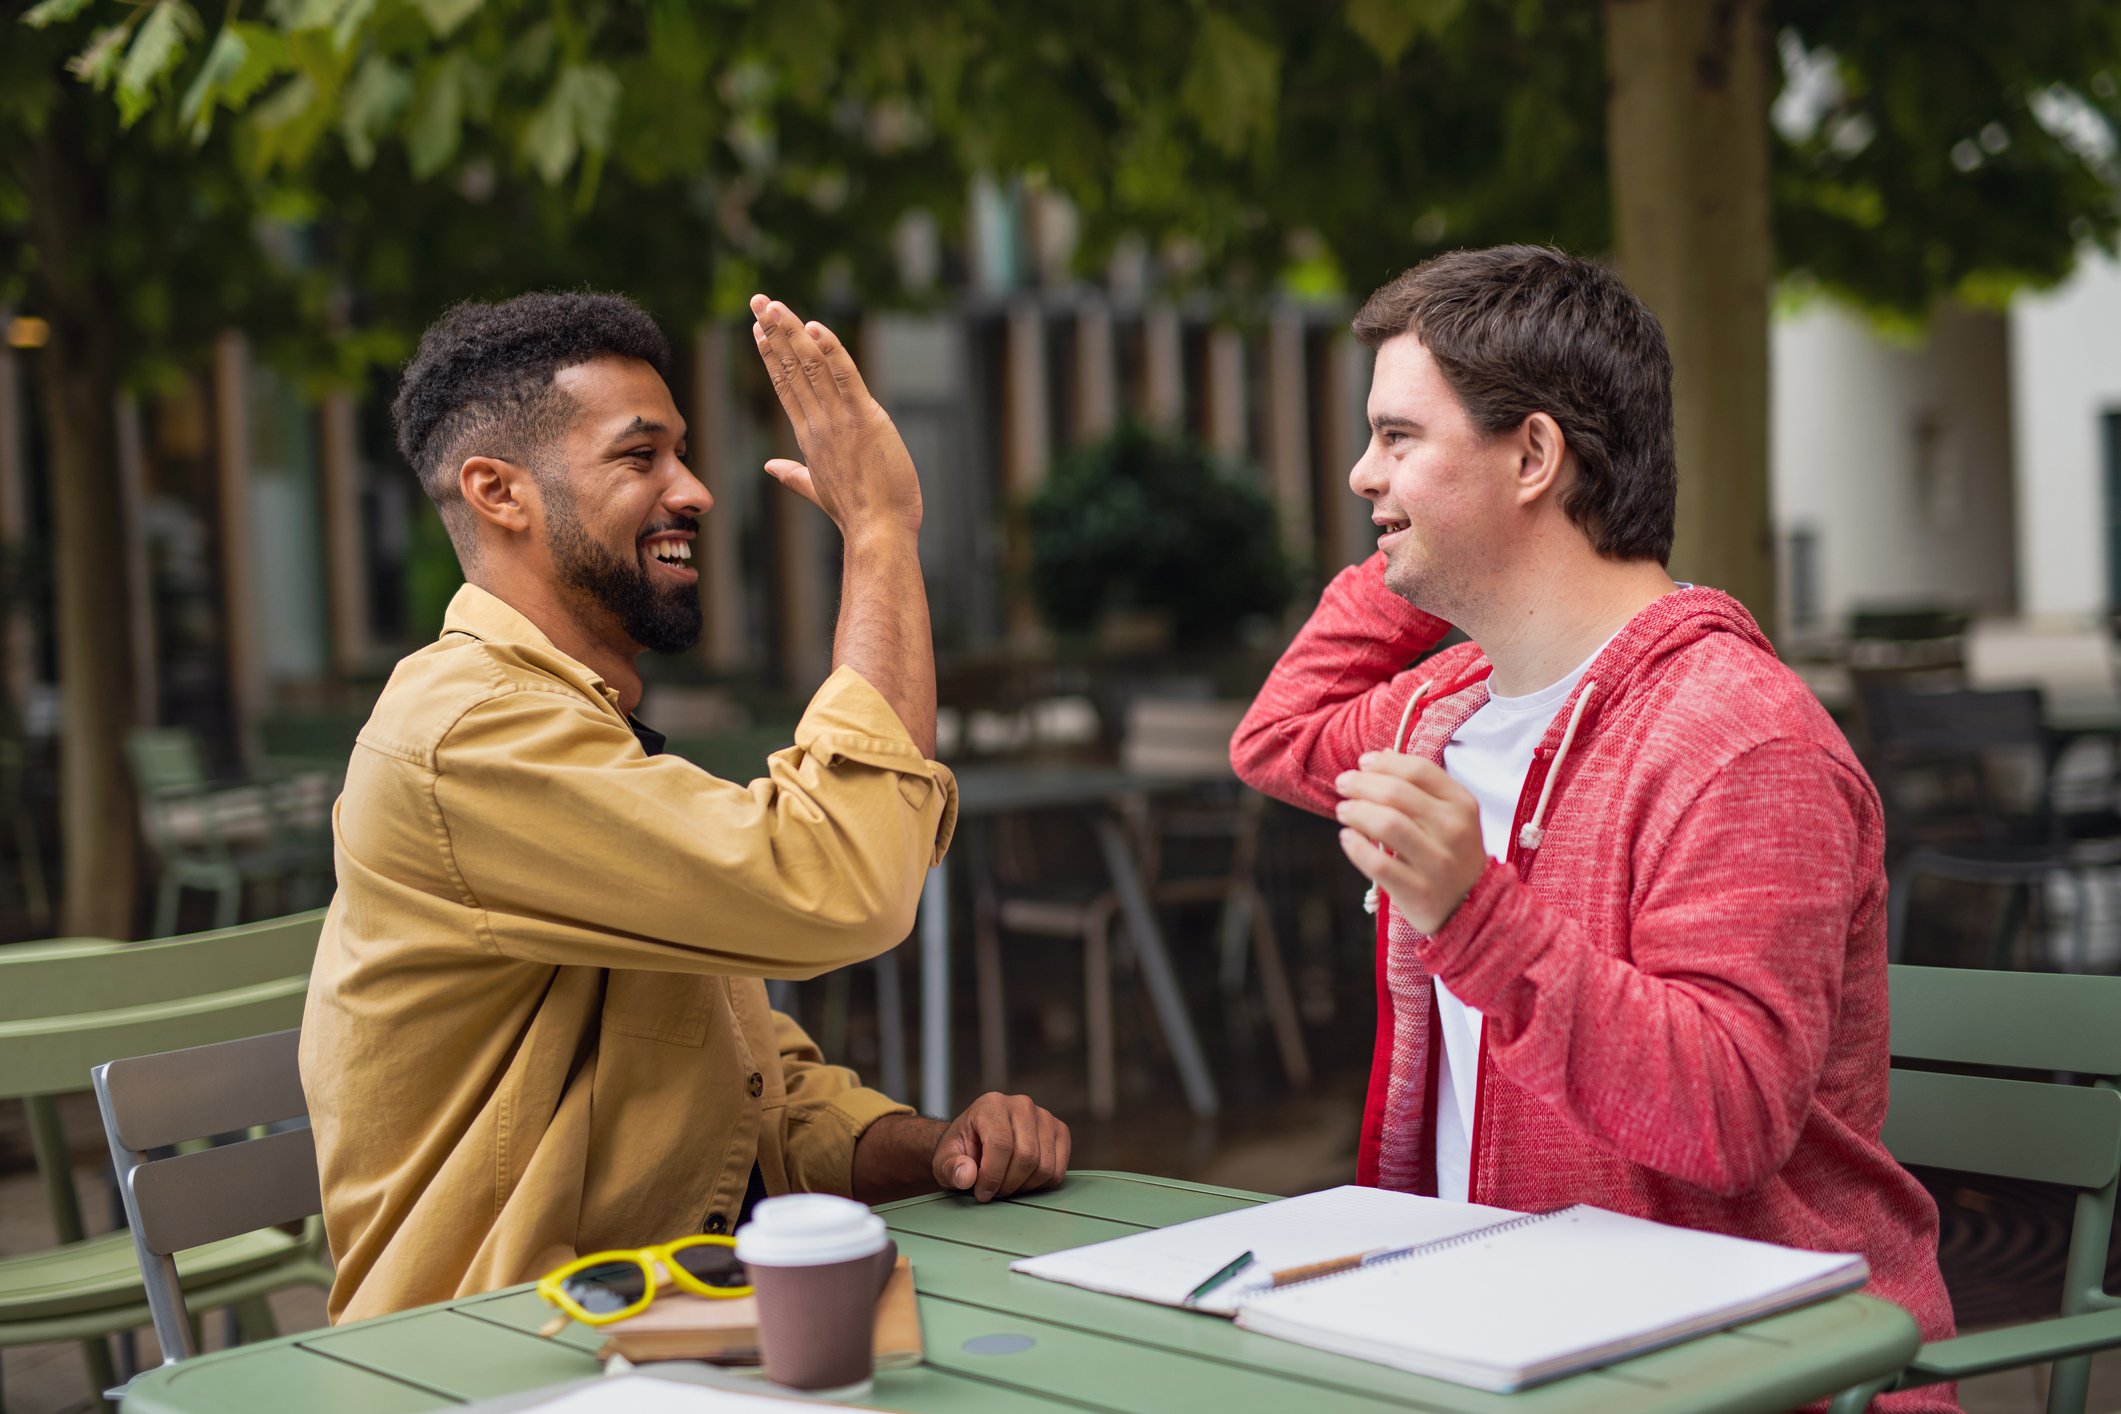 Man mentoring a student giving each other a high five